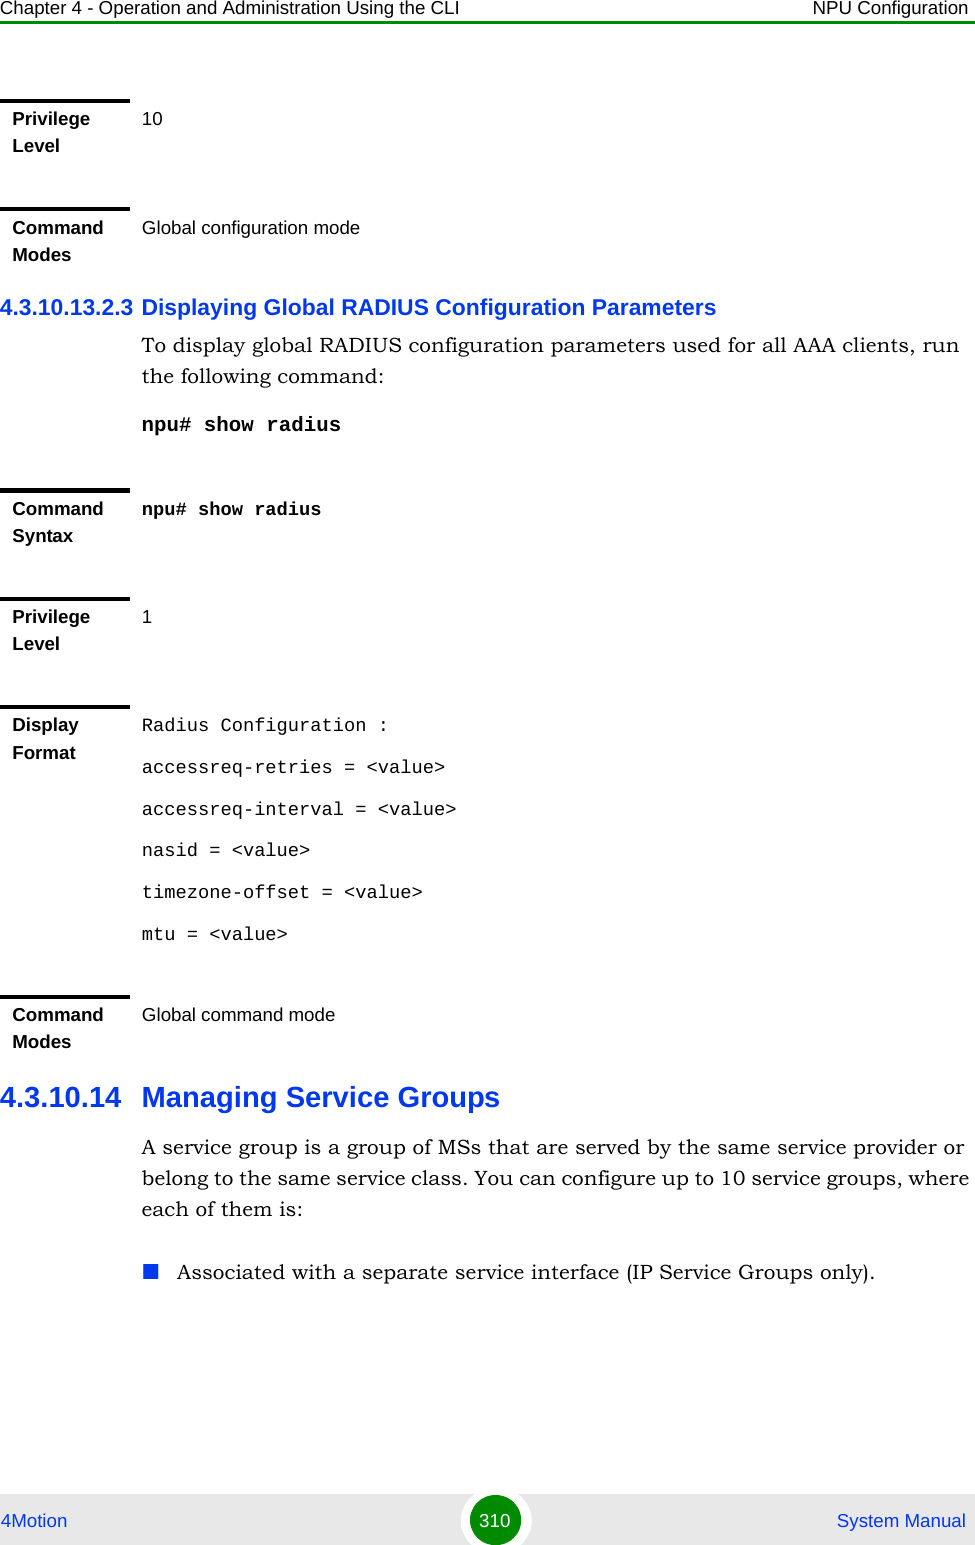 Chapter 4 - Operation and Administration Using the CLI NPU Configuration4Motion 310  System Manual4.3.10.13.2.3 Displaying Global RADIUS Configuration ParametersTo display global RADIUS configuration parameters used for all AAA clients, run the following command:npu# show radius4.3.10.14 Managing Service GroupsA service group is a group of MSs that are served by the same service provider or belong to the same service class. You can configure up to 10 service groups, where each of them is:Associated with a separate service interface (IP Service Groups only).Privilege Level10Command ModesGlobal configuration modeCommand Syntaxnpu# show radiusPrivilege Level1Display FormatRadius Configuration :accessreq-retries = &lt;value&gt;accessreq-interval = &lt;value&gt;nasid = &lt;value&gt;timezone-offset = &lt;value&gt;mtu = &lt;value&gt;Command ModesGlobal command mode